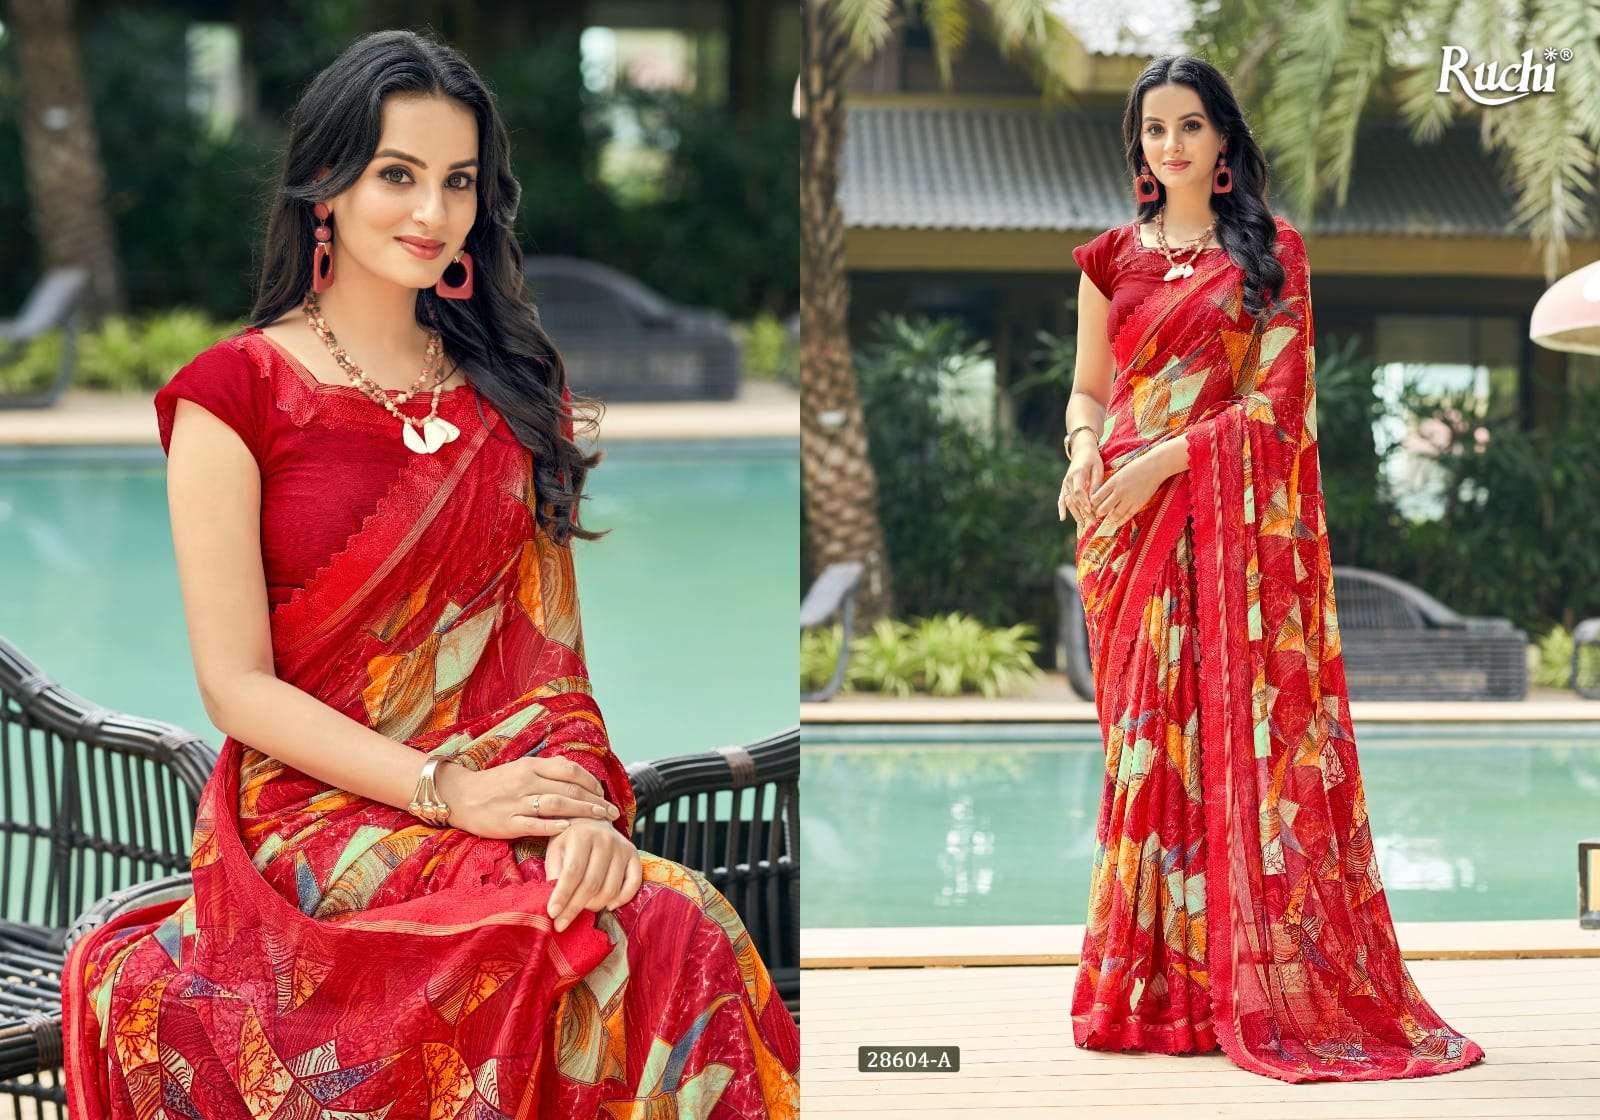 Affordable printed saree from @SHOPSY starting Rs.255, Working wear saree  haul